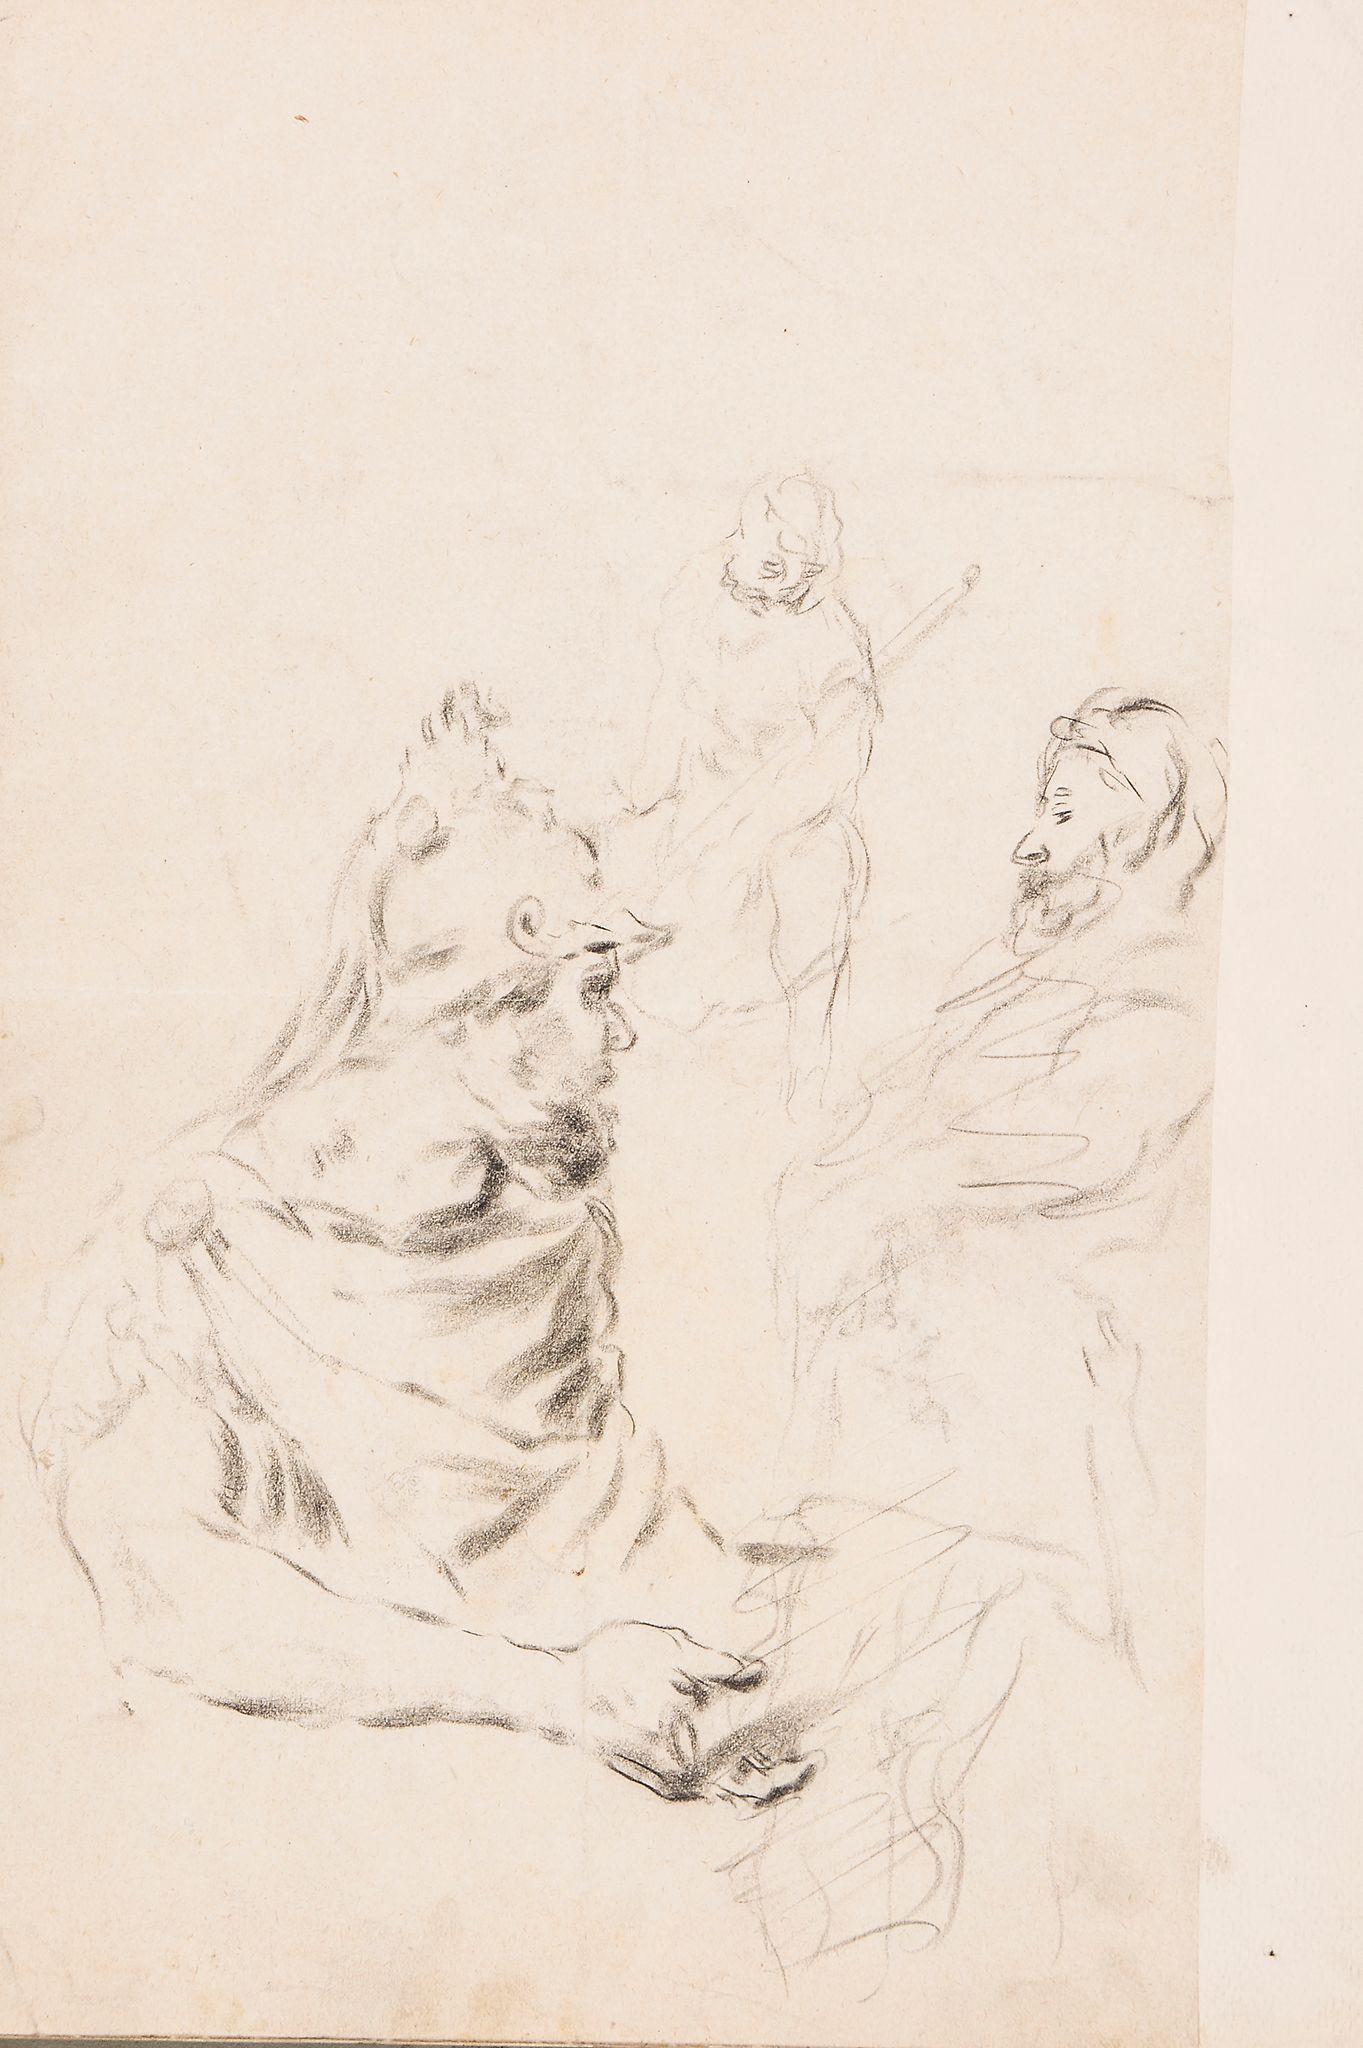 Hermann Eichler (1842-1901) - A collection of 23 sheets of sketches and preparatory studies